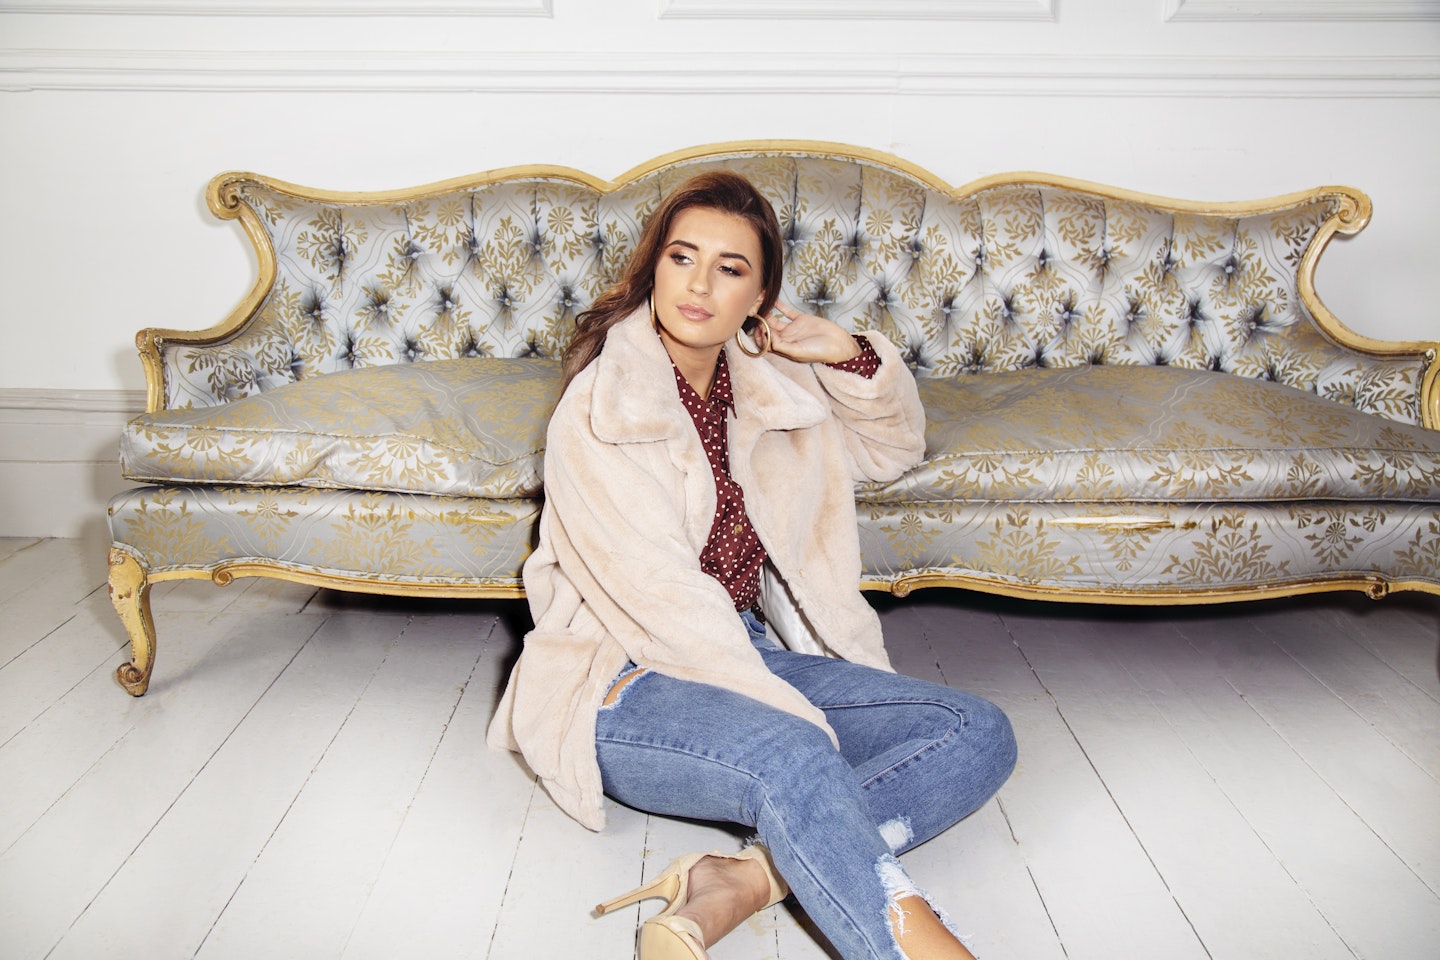 Dani Dyer X In The Style, available at InTheStyle.com.